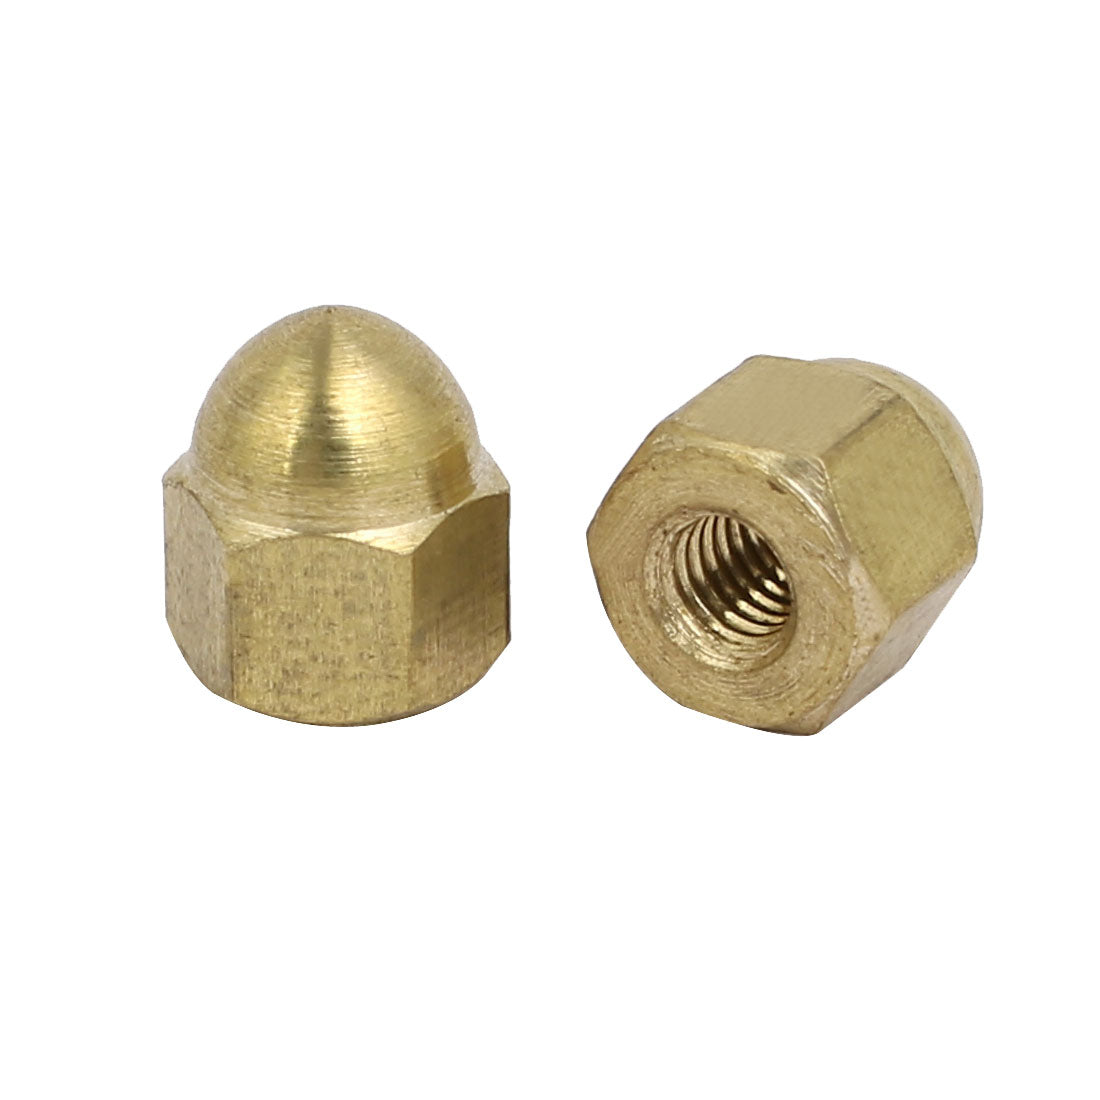 uxcell Uxcell 5pcs M3 Female Thread Nut DIN1587 Dome Cap Head Hex Brass Tone